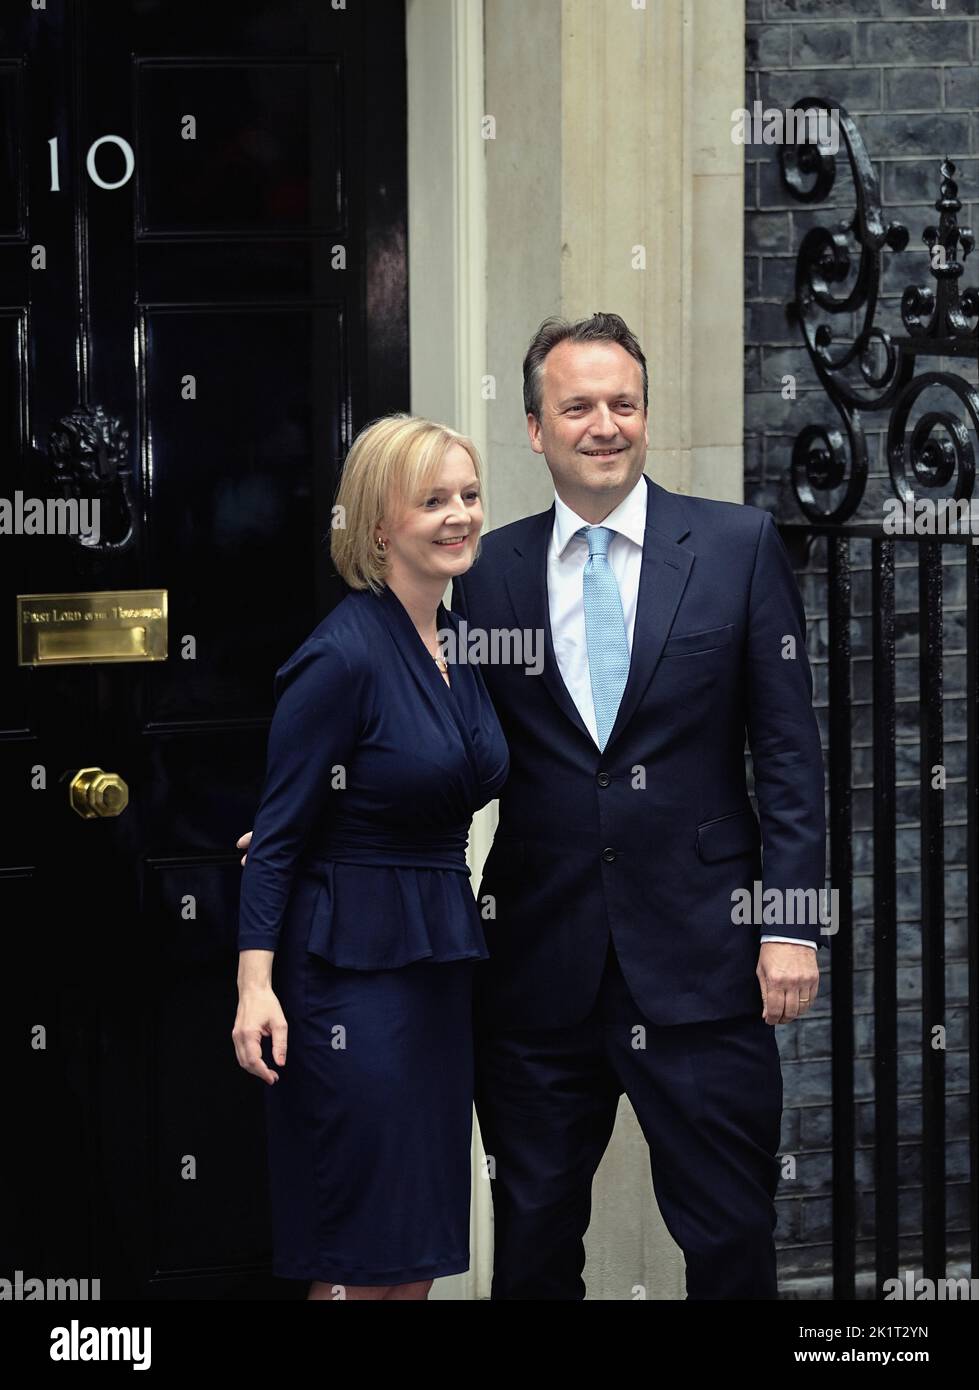 England, London, Liz Truss and her husband Hugh O'Leary on the steps of number 10 Downing Street on her first day as Primt Minister 06-09-2022. Stock Photo